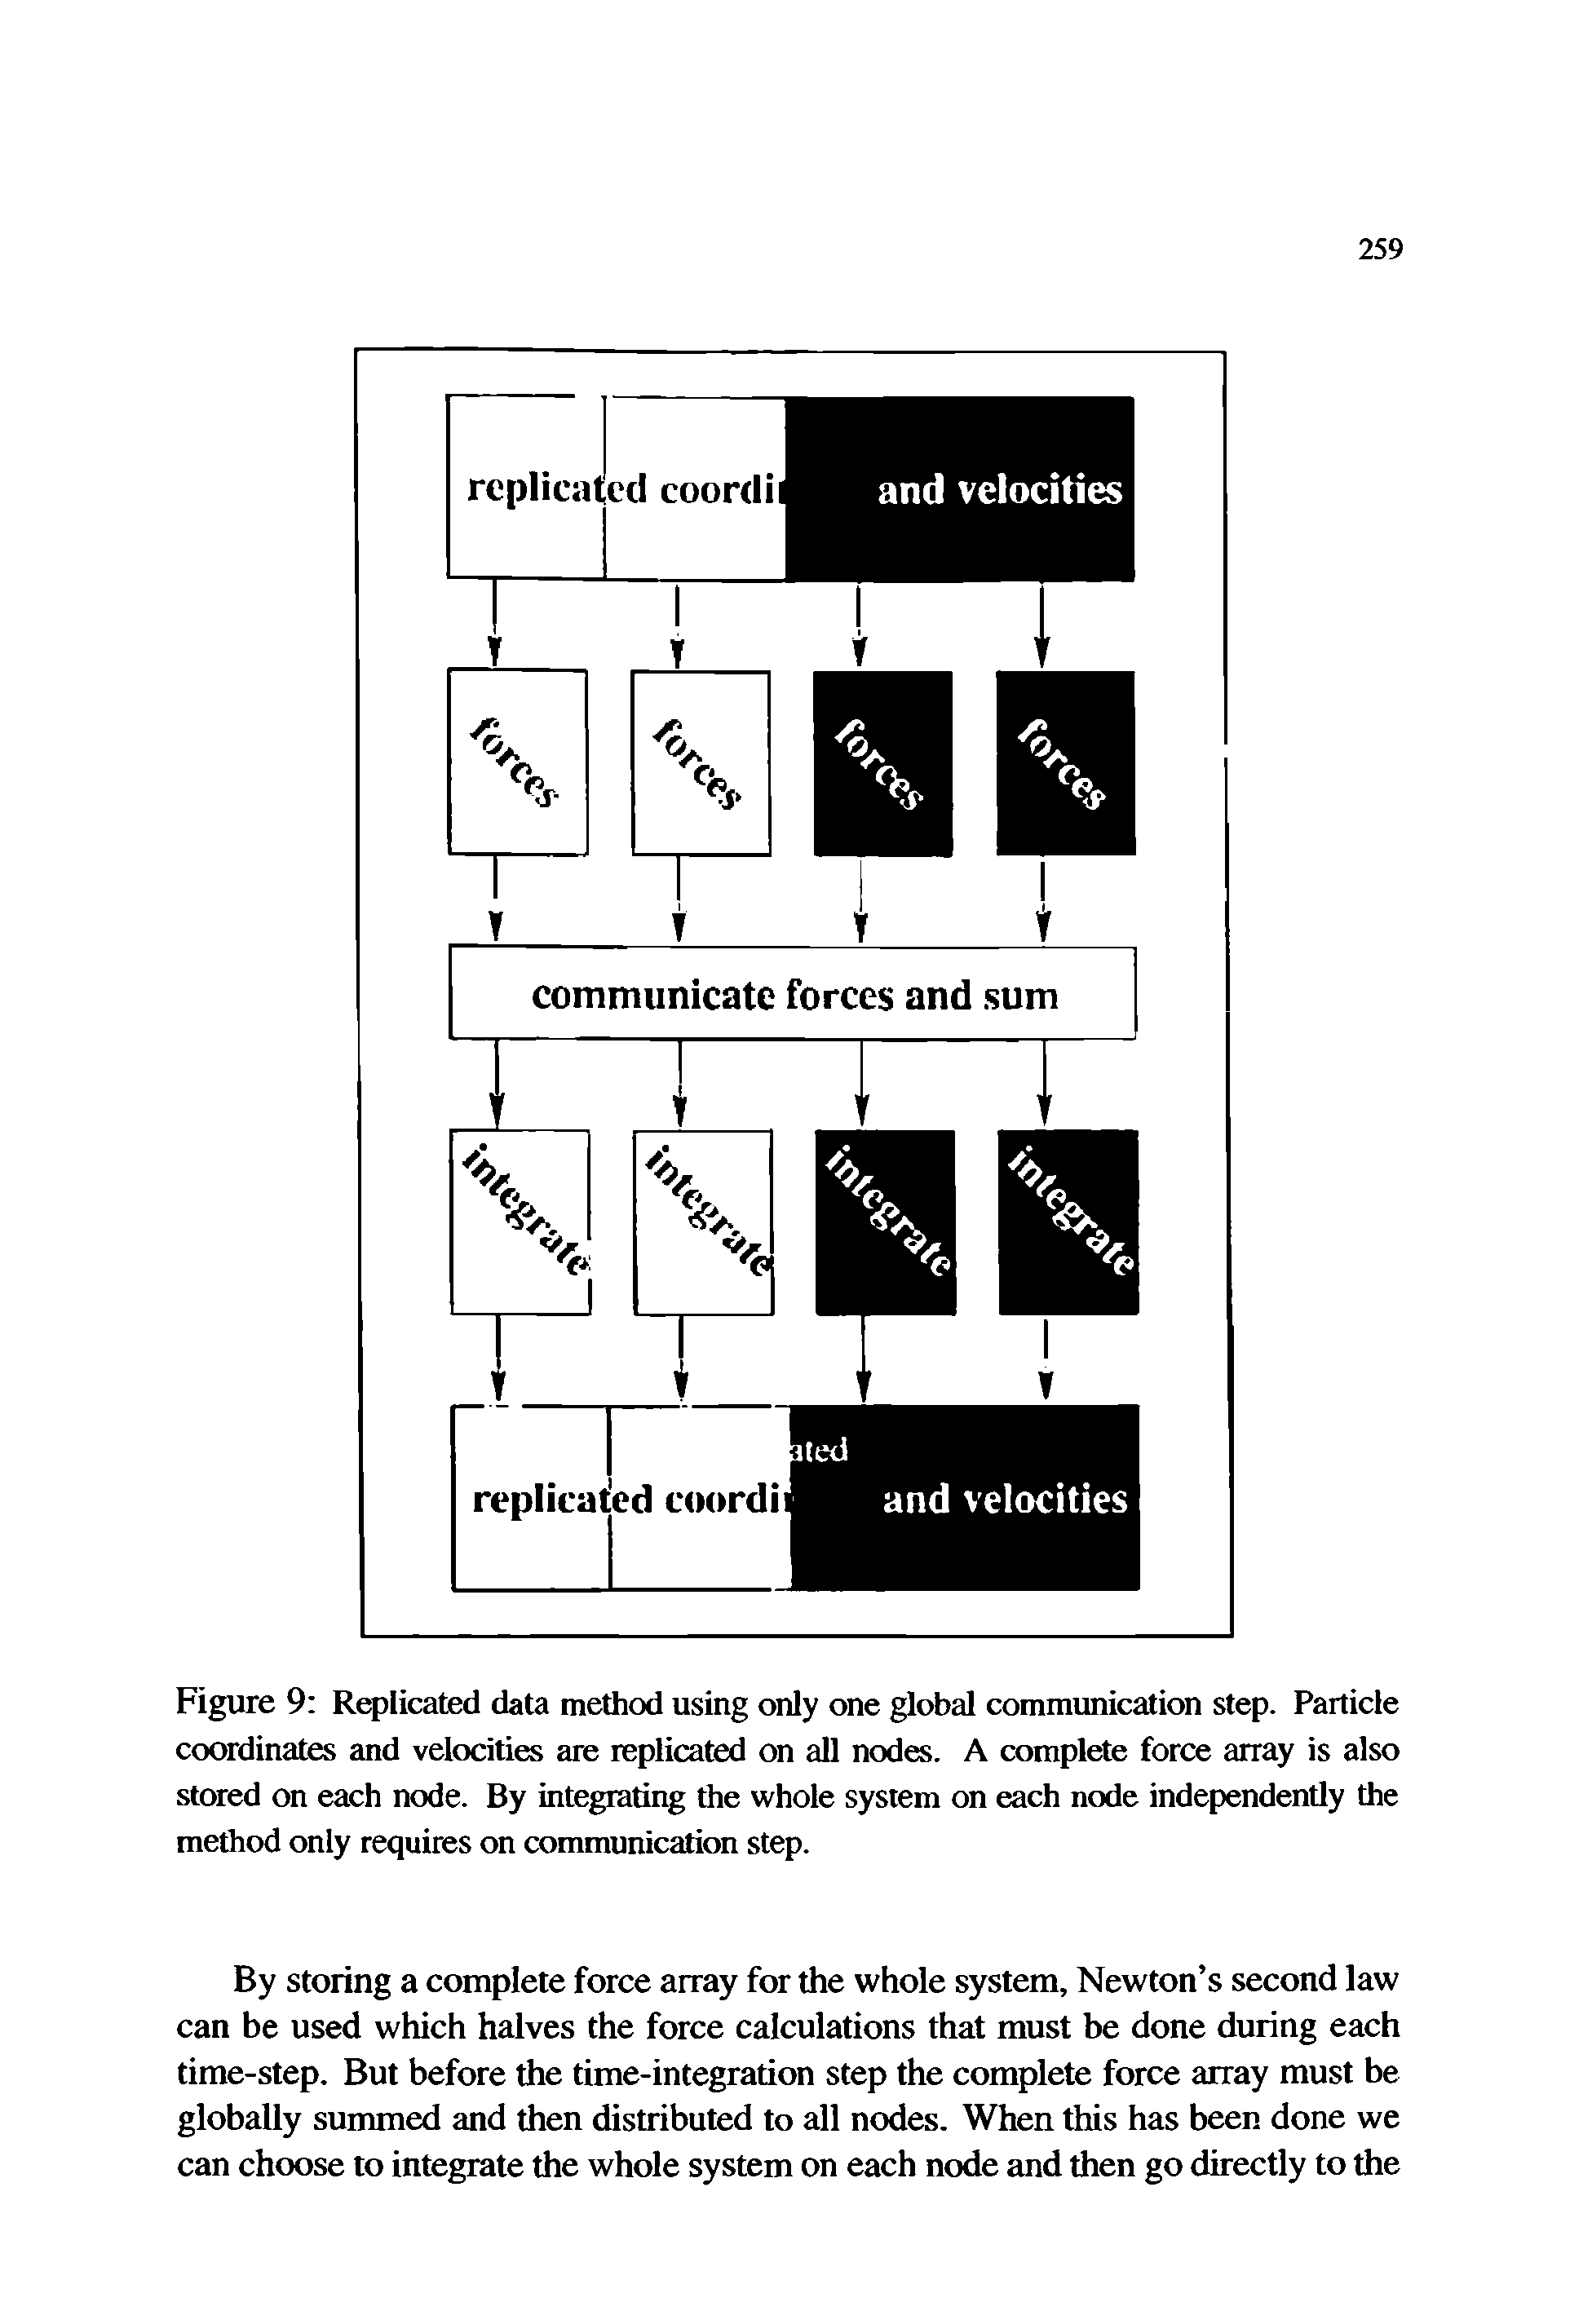 Figure 9 Replicated data method using only one global communication step. Particle coordinates and velocities are replicated on aU nodes. A complete force array is also stored on each node. By integrating the whole system on each node independently the method only requires on communication step.